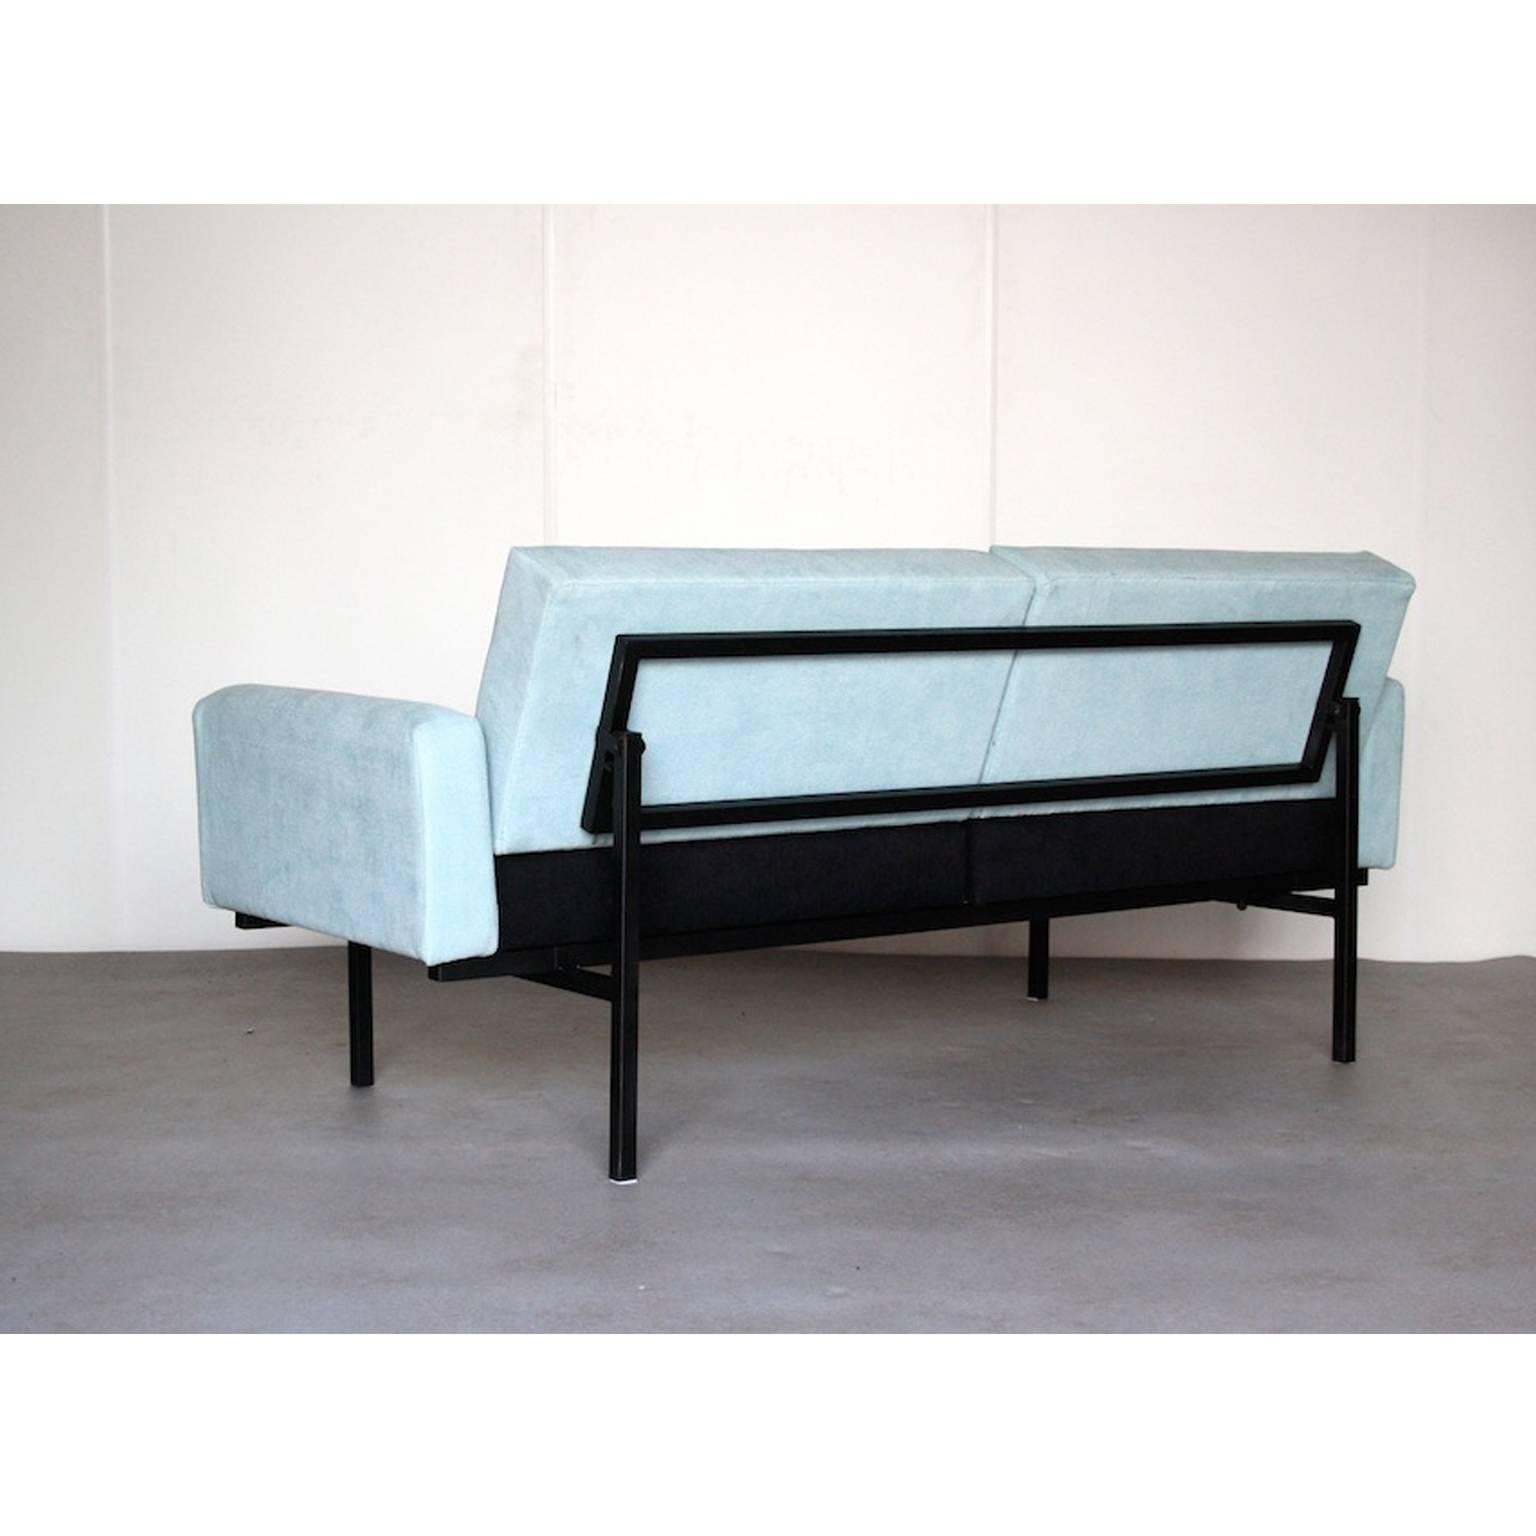 Sofa or Daybed by Coen de Vries for Devo, Dutch Design, 1952 In Good Condition For Sale In Lijnden, Noord-Holland